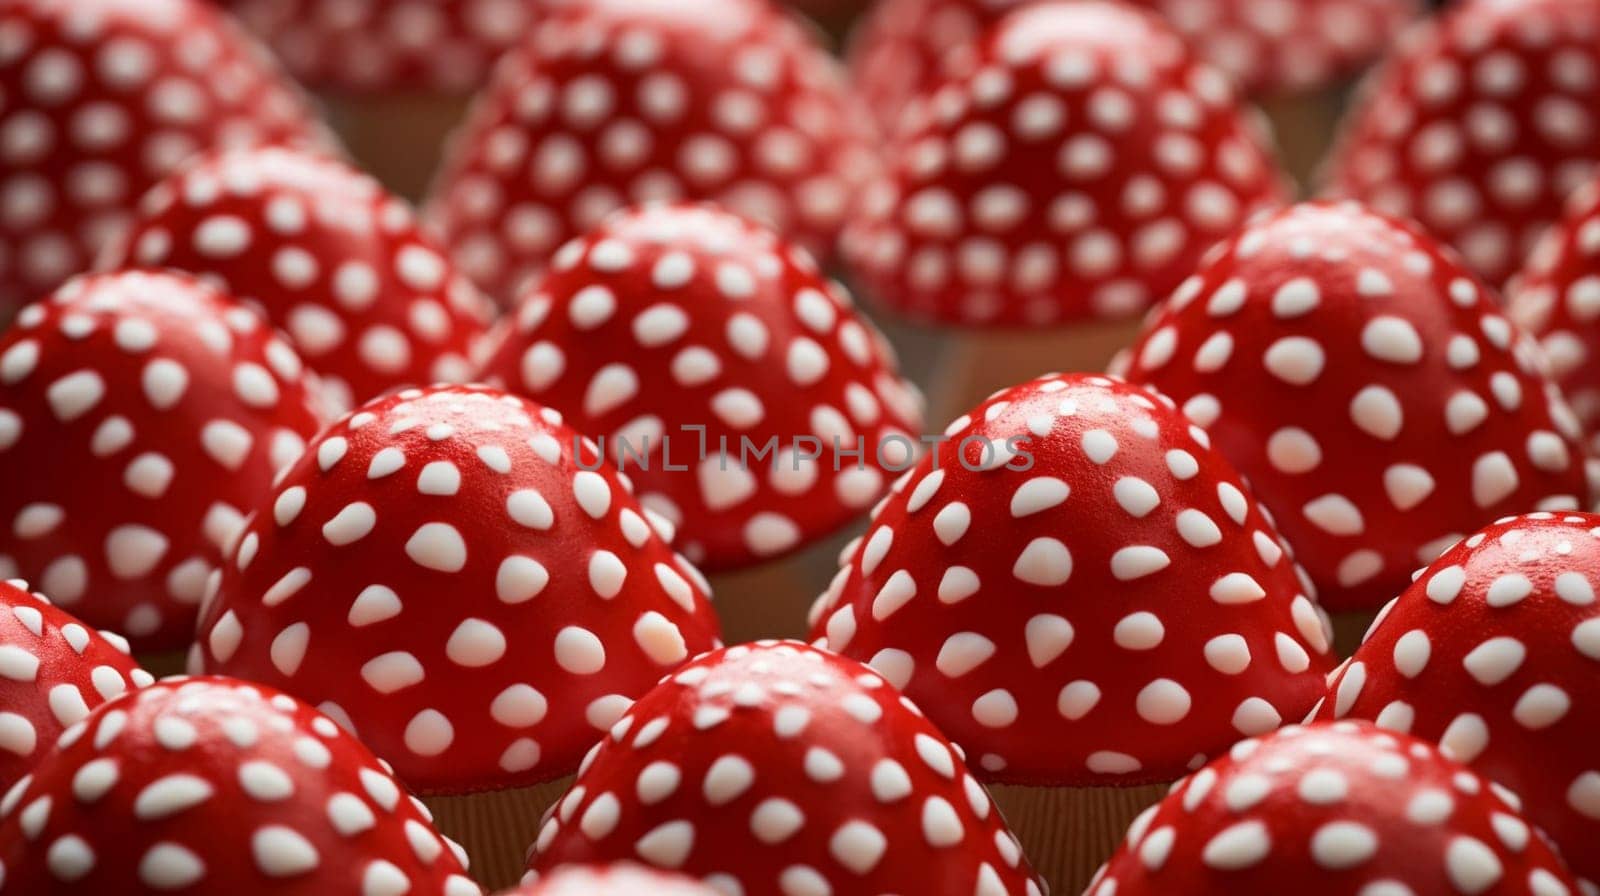 Vibrant red mushrooms with white spots, close-up, with a blurry background. High quality photo